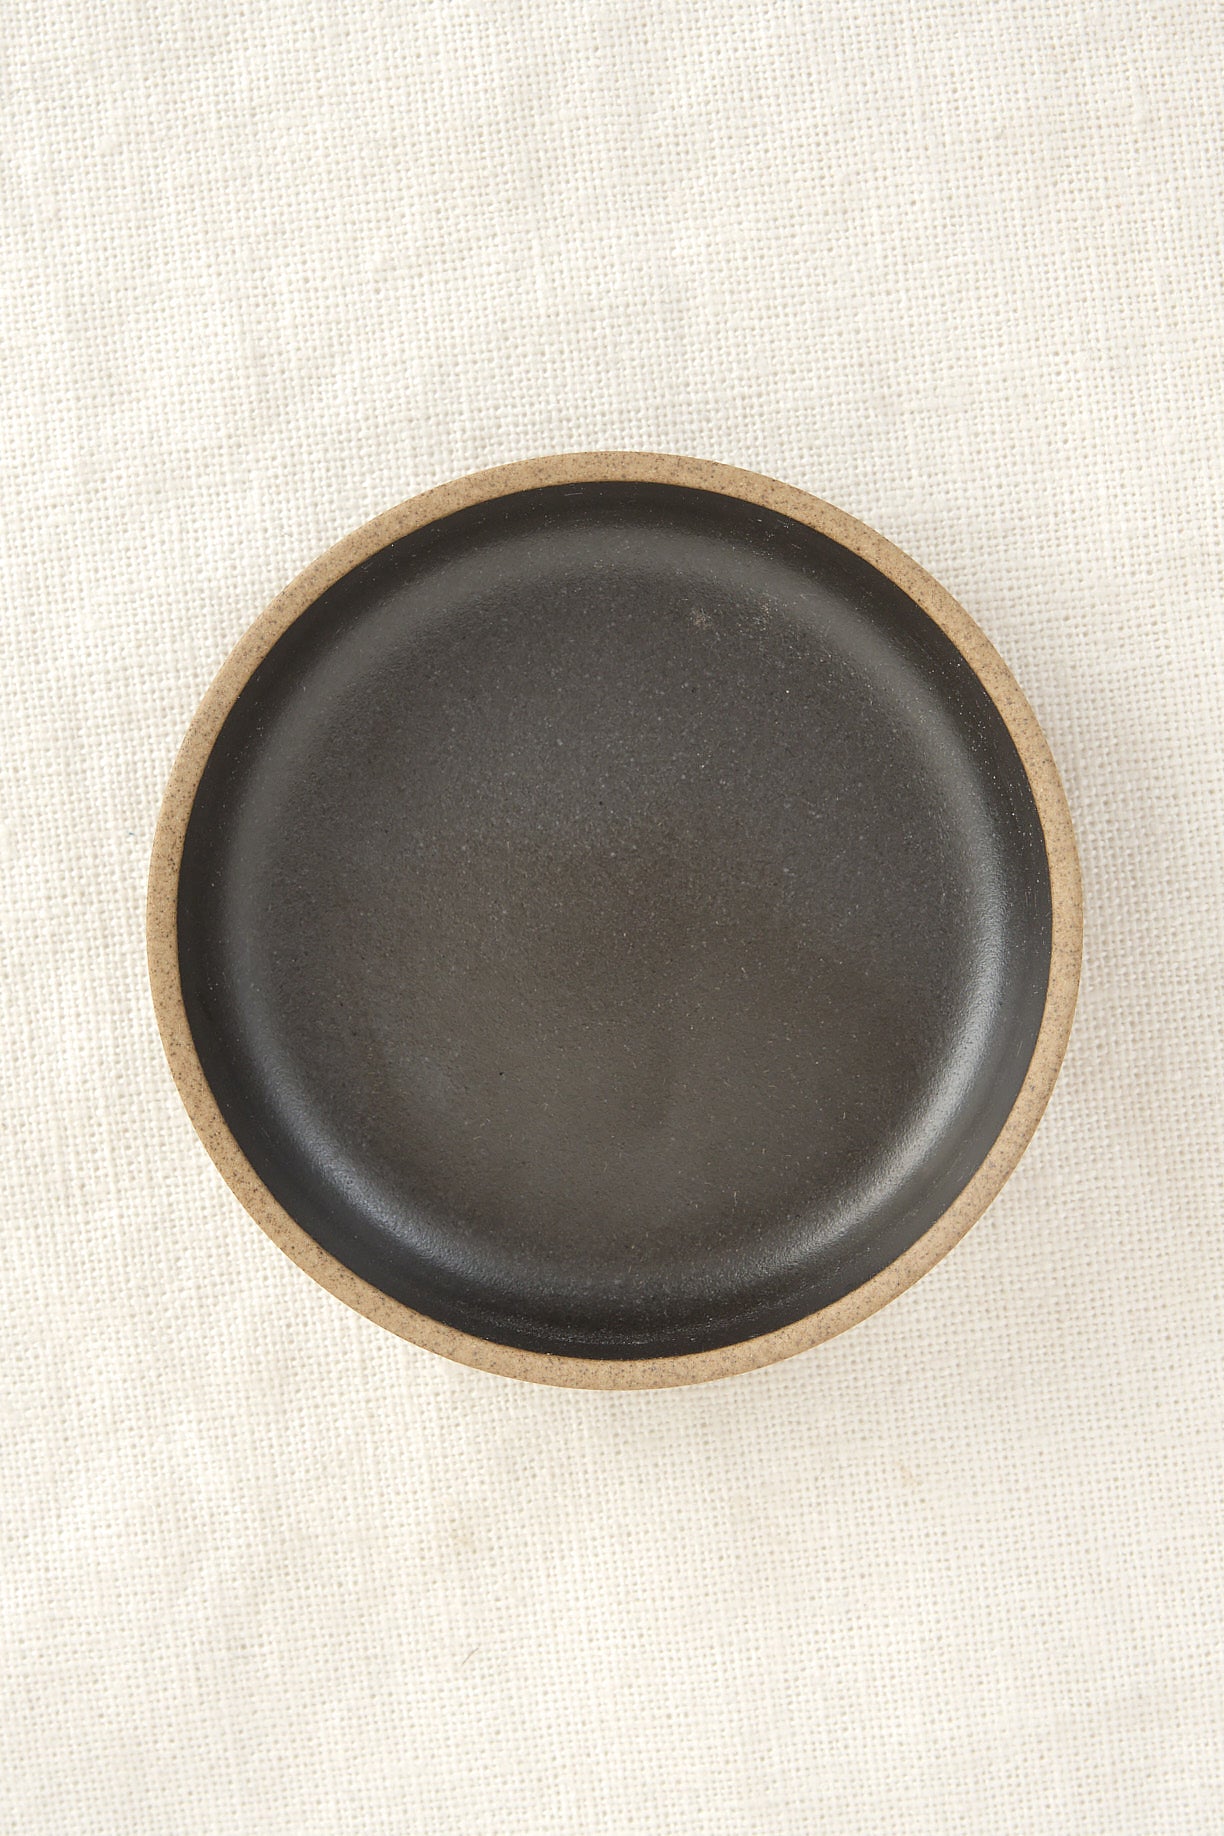 Hasami Porcelain small lid